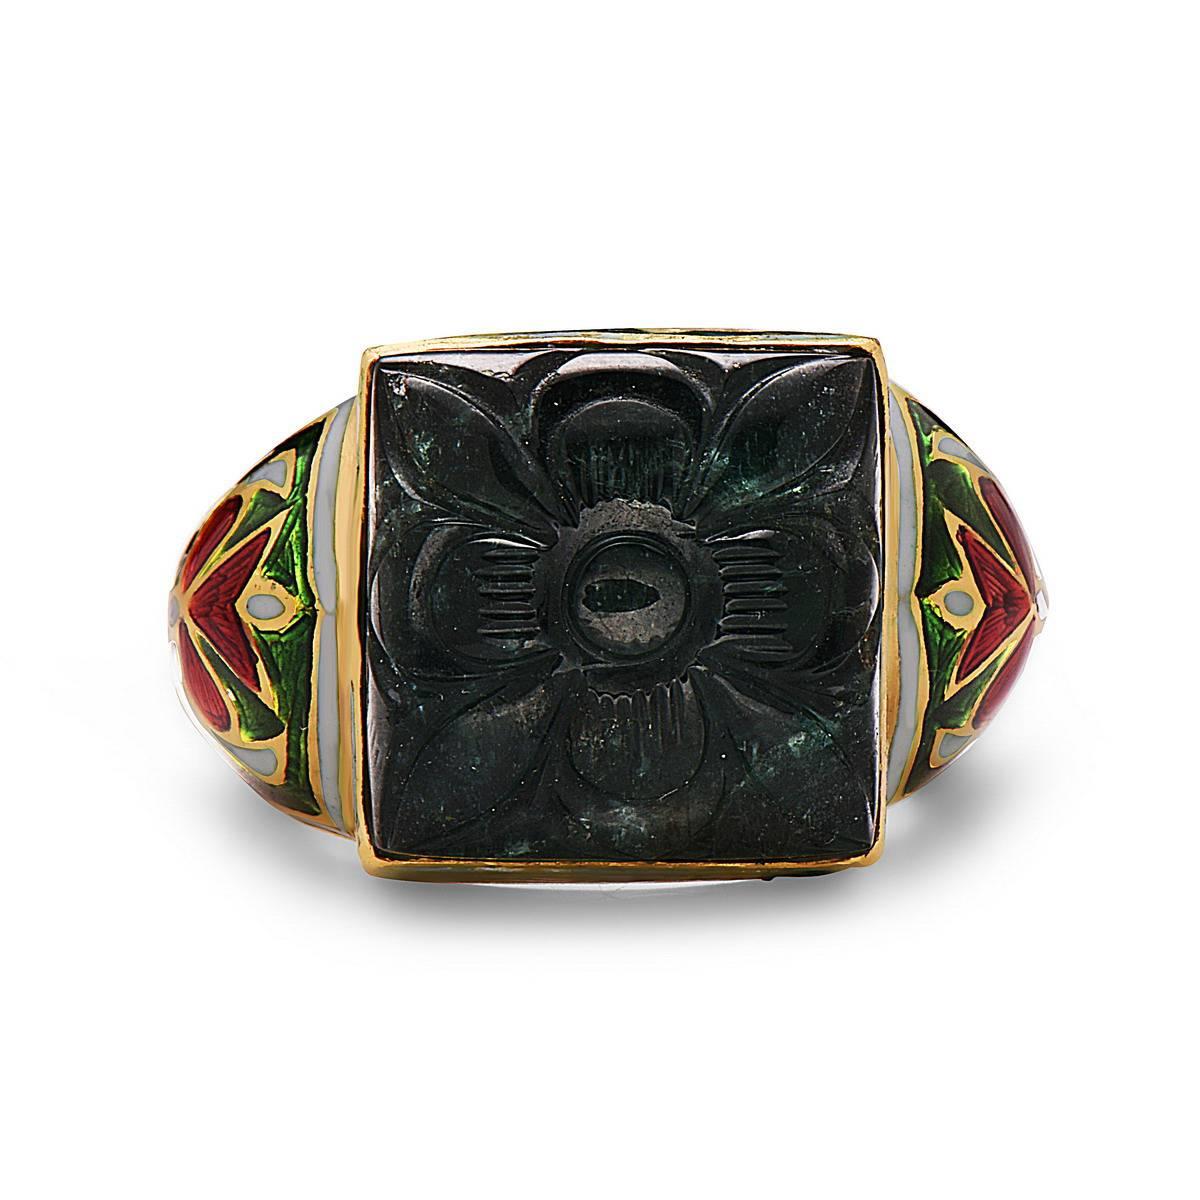 Very Vintage and royal looking ring with carved emerald as center piece and whole of shank in 22K gold enameled with a floral motif. 

Ring Size: 9 ( Can be sized )

22kt: 13.67gs
Emerald: 9.45ct
